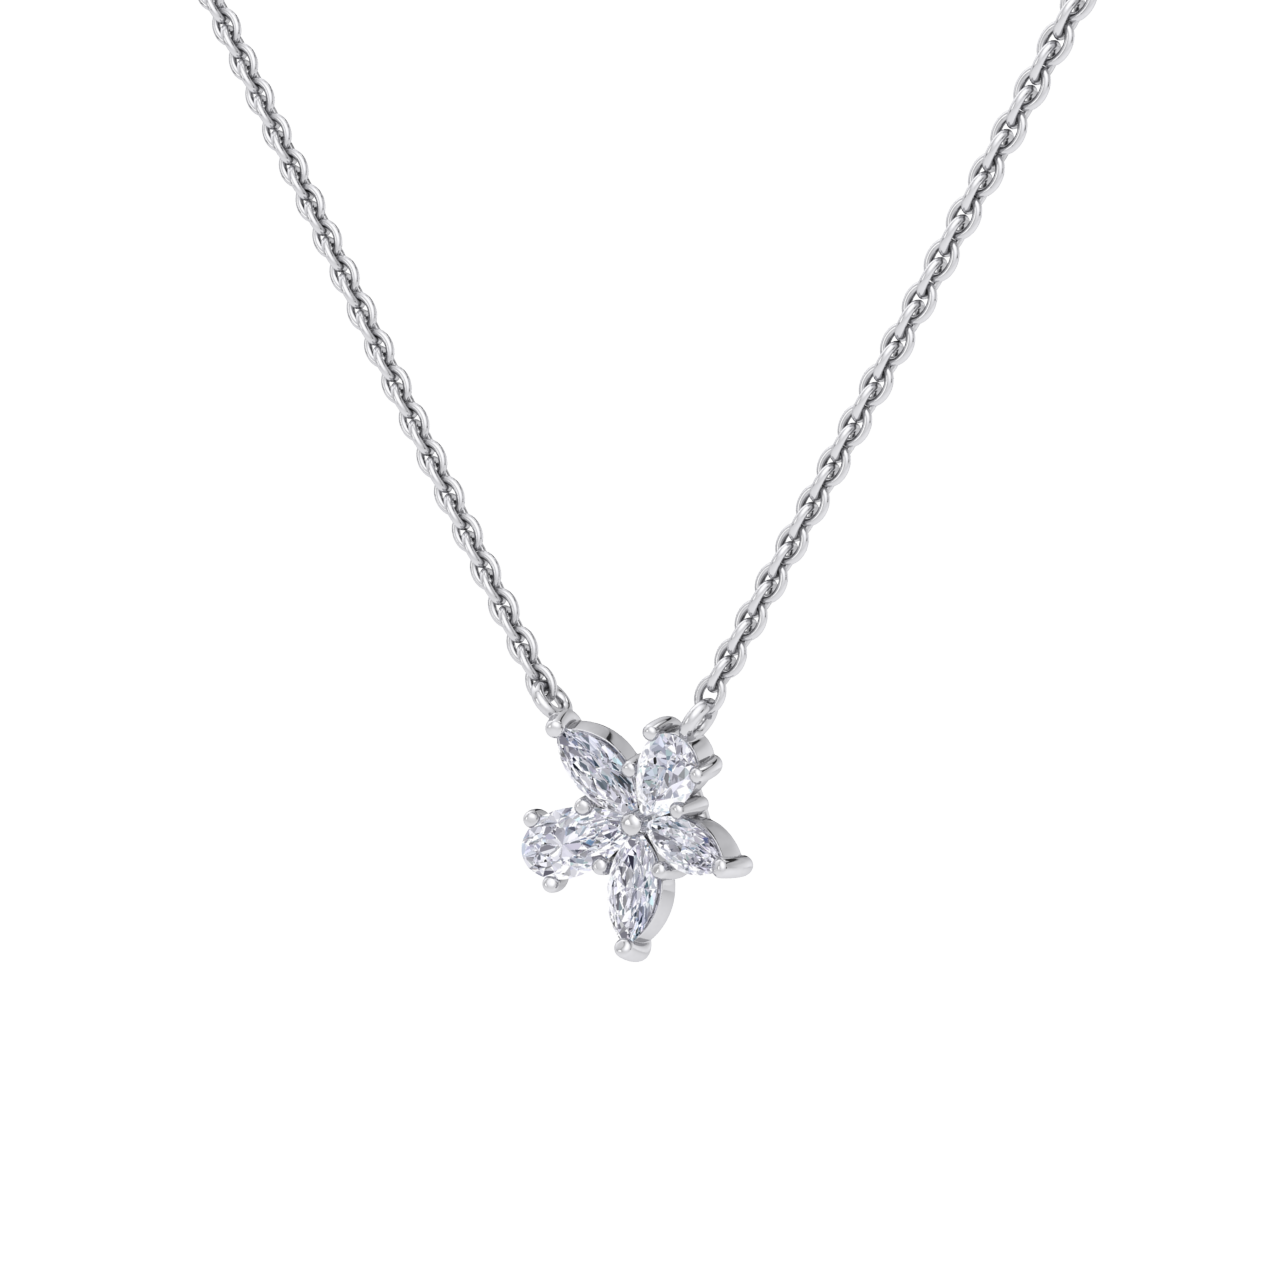 Petite flower necklace in yellow gold with white diamonds of 0.61 ct in weight

